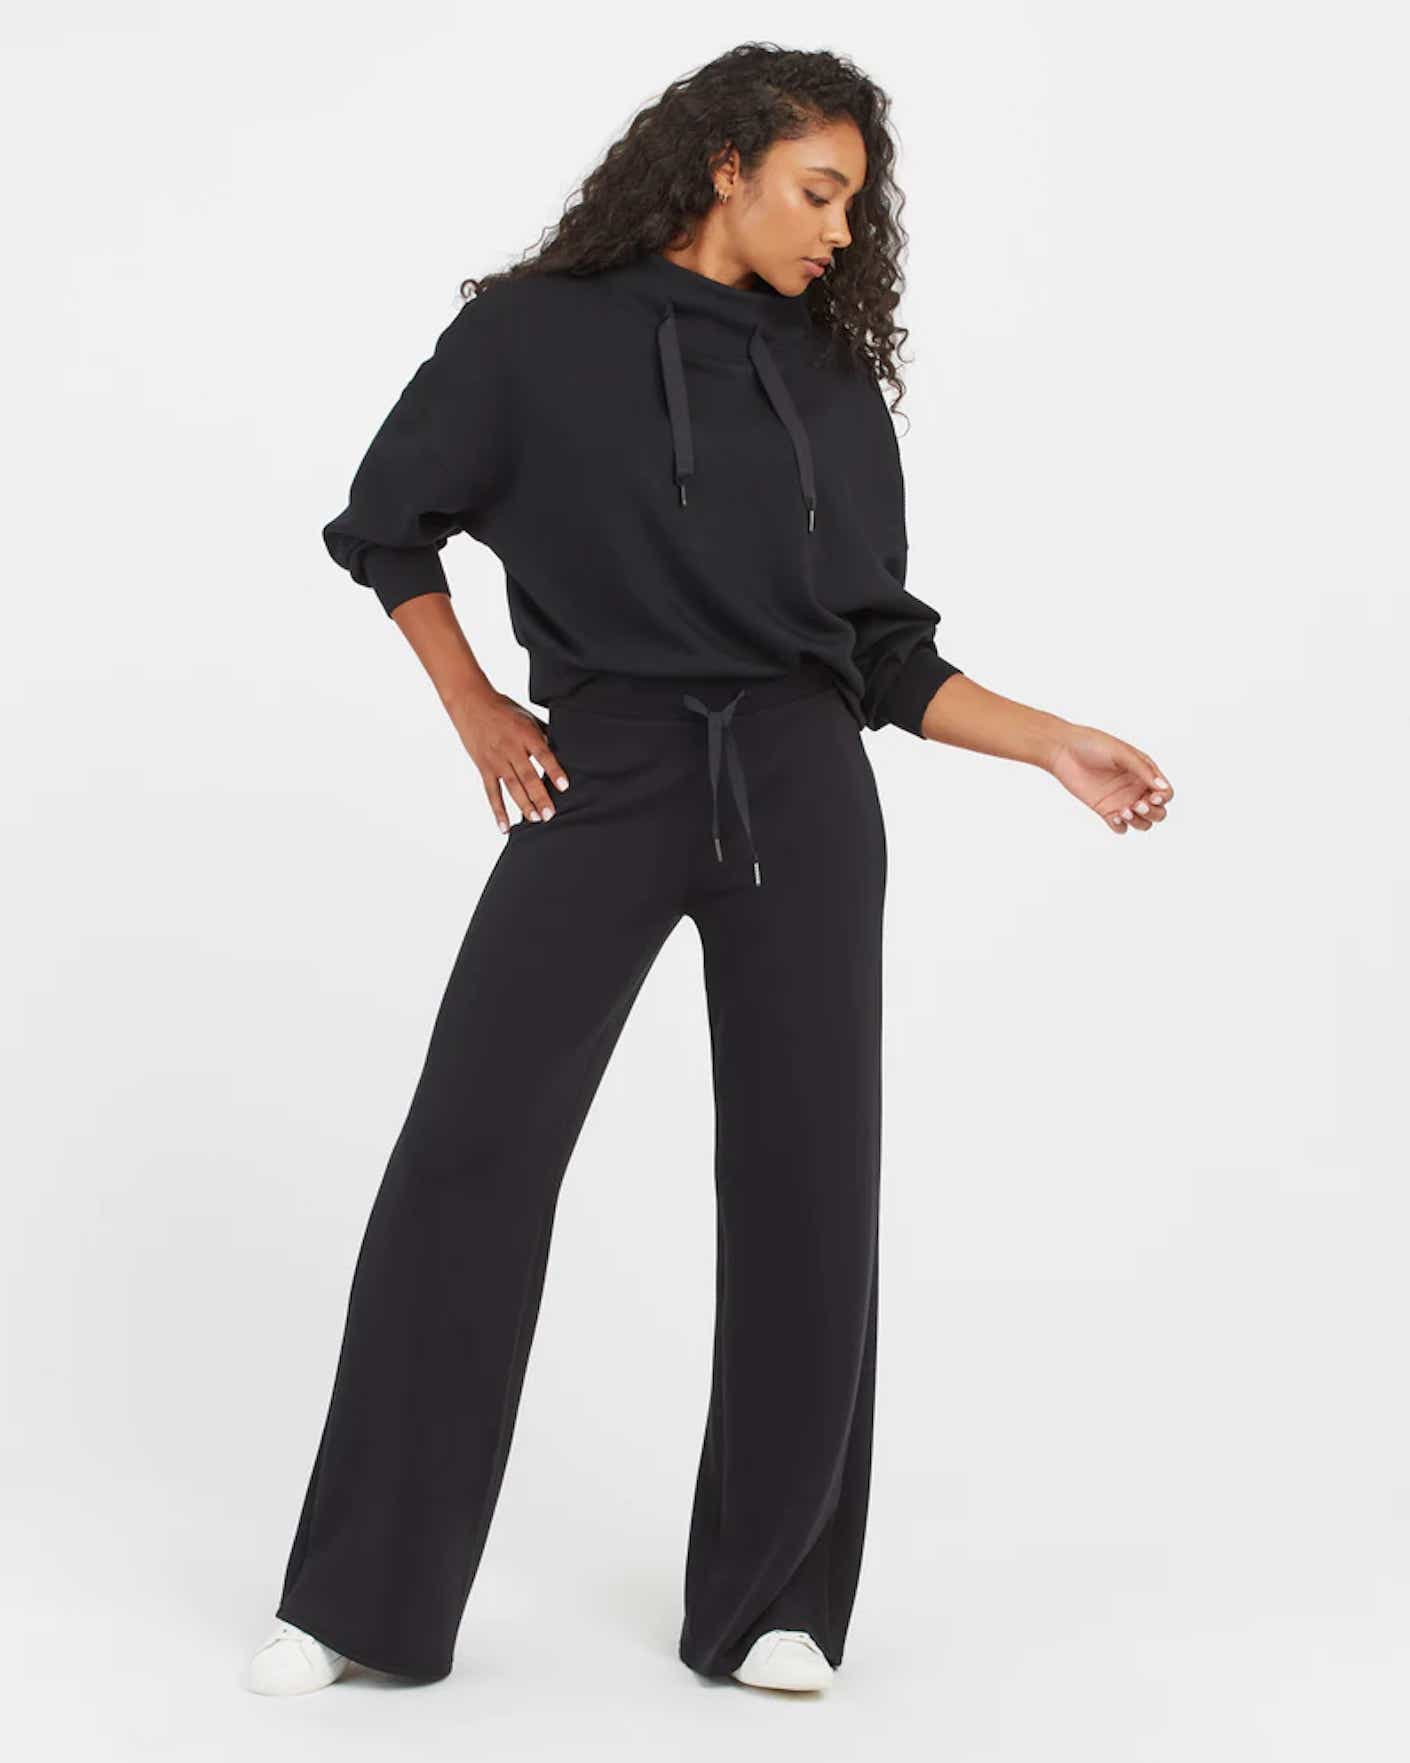 two piece set inspired by SPANX. Cozy and comfy but also put to